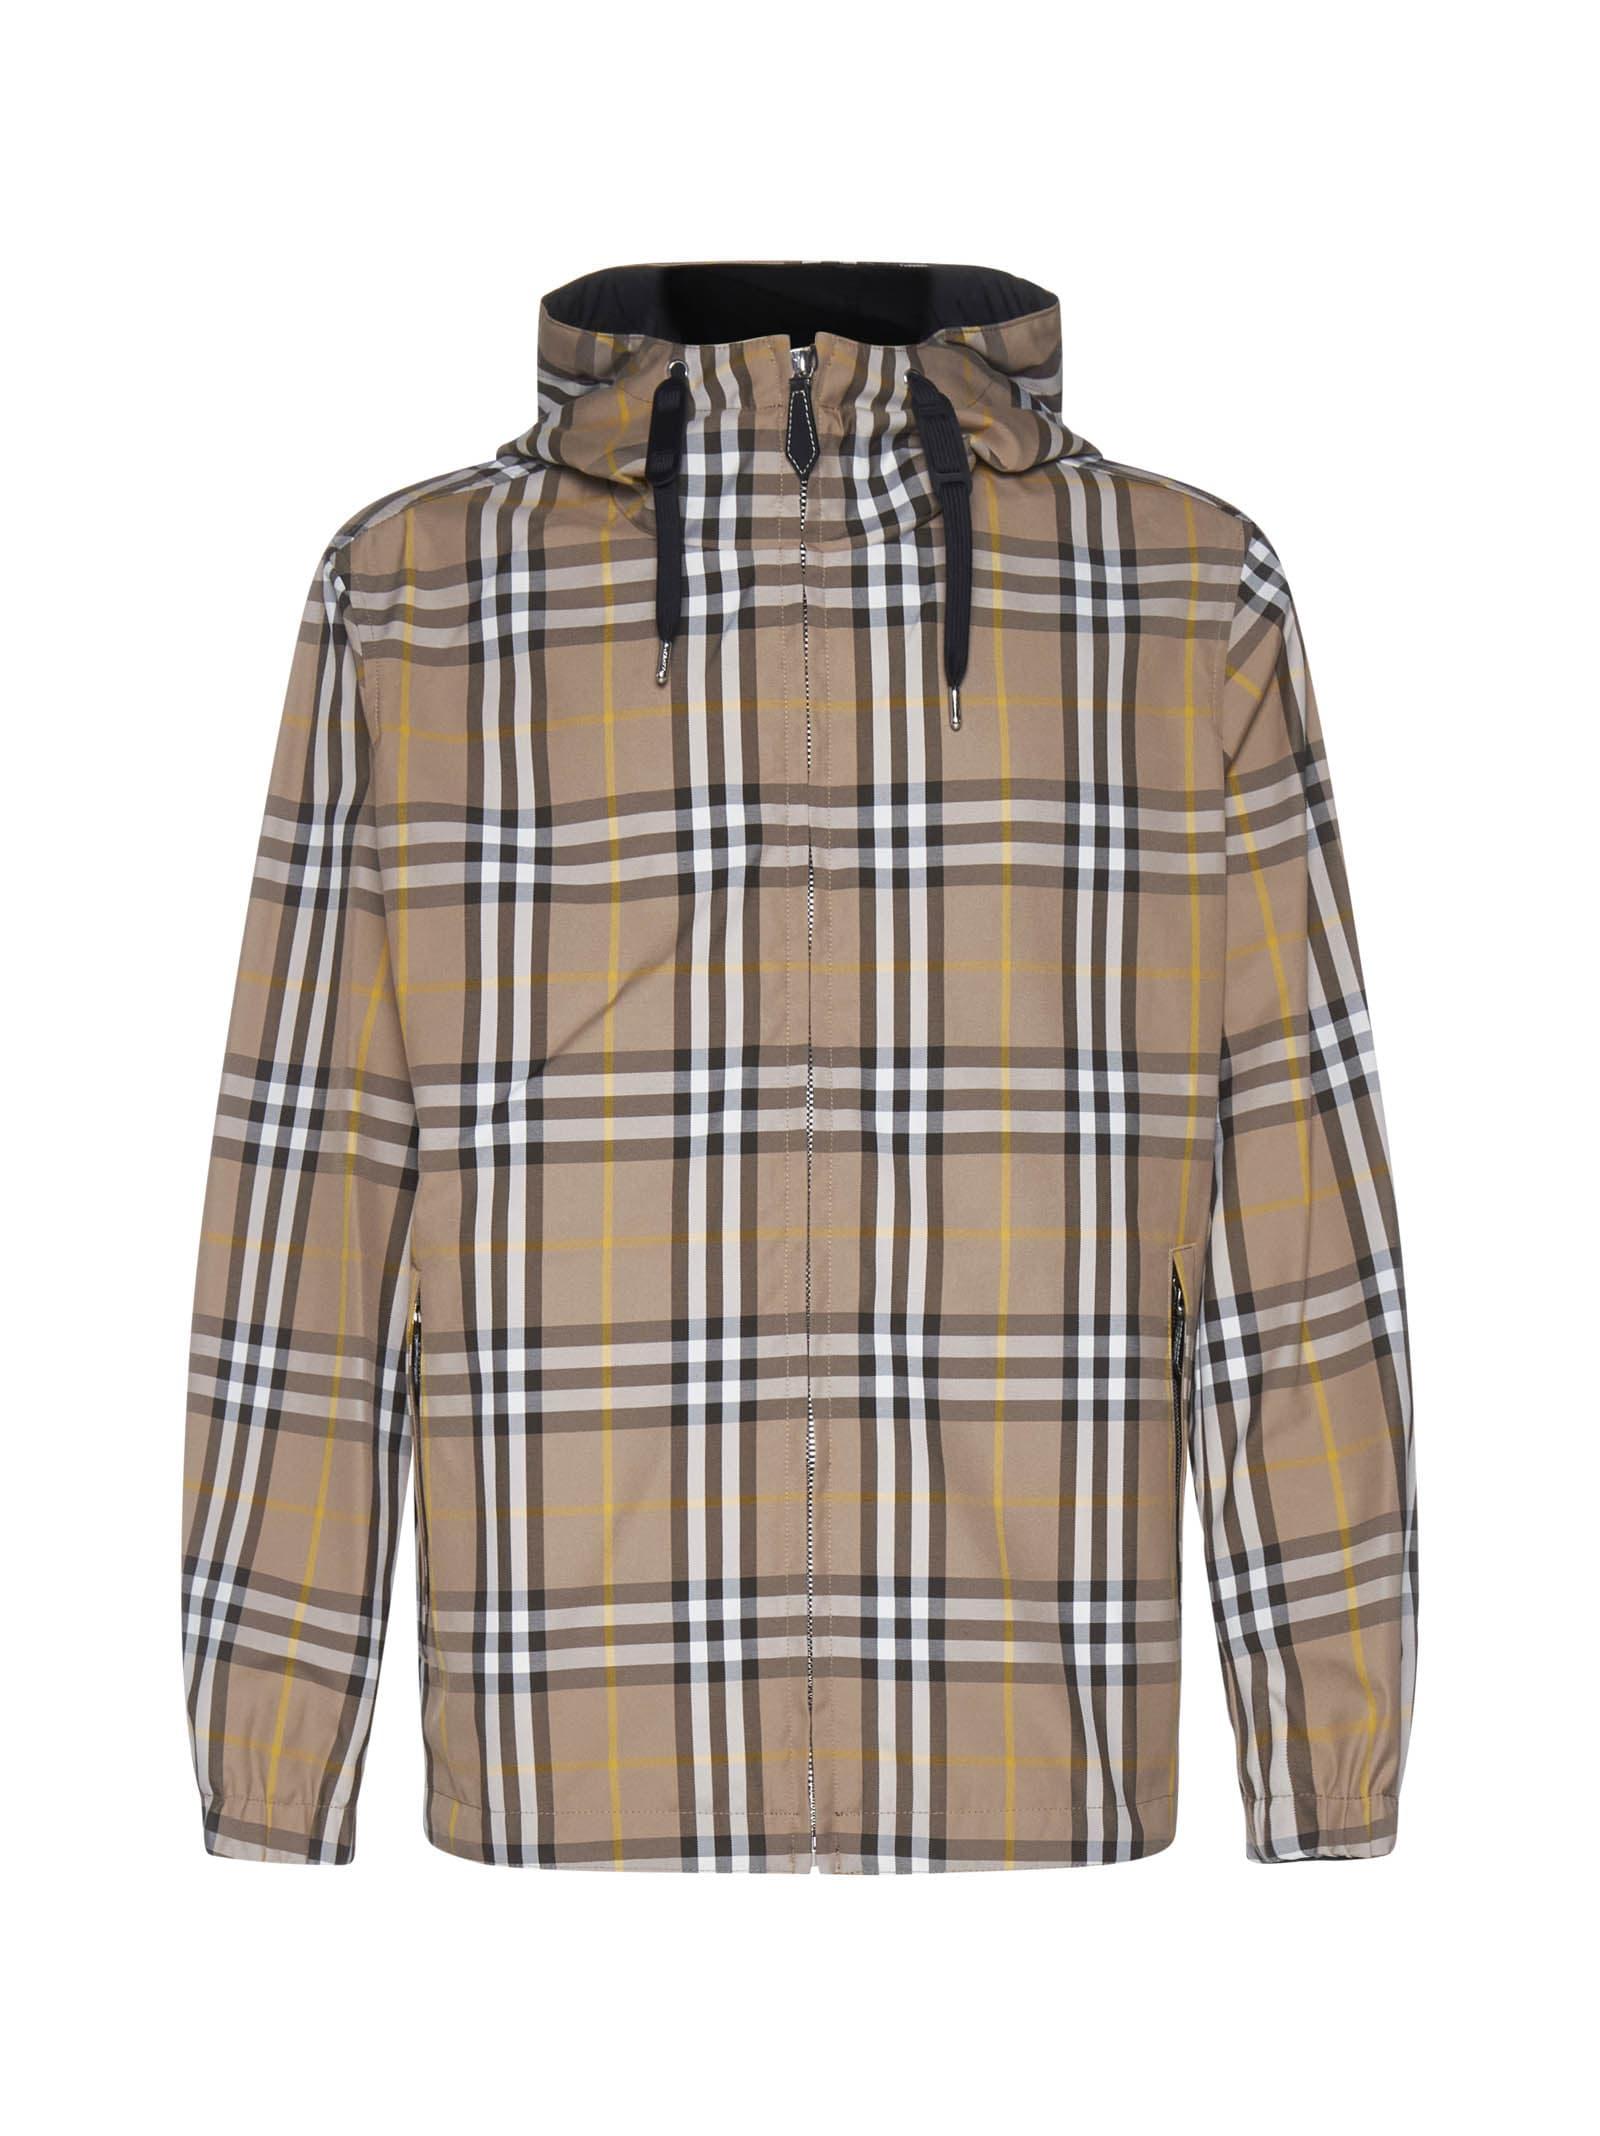 Burberry Standford Check Print Reversible Jacket for Men | Lyst